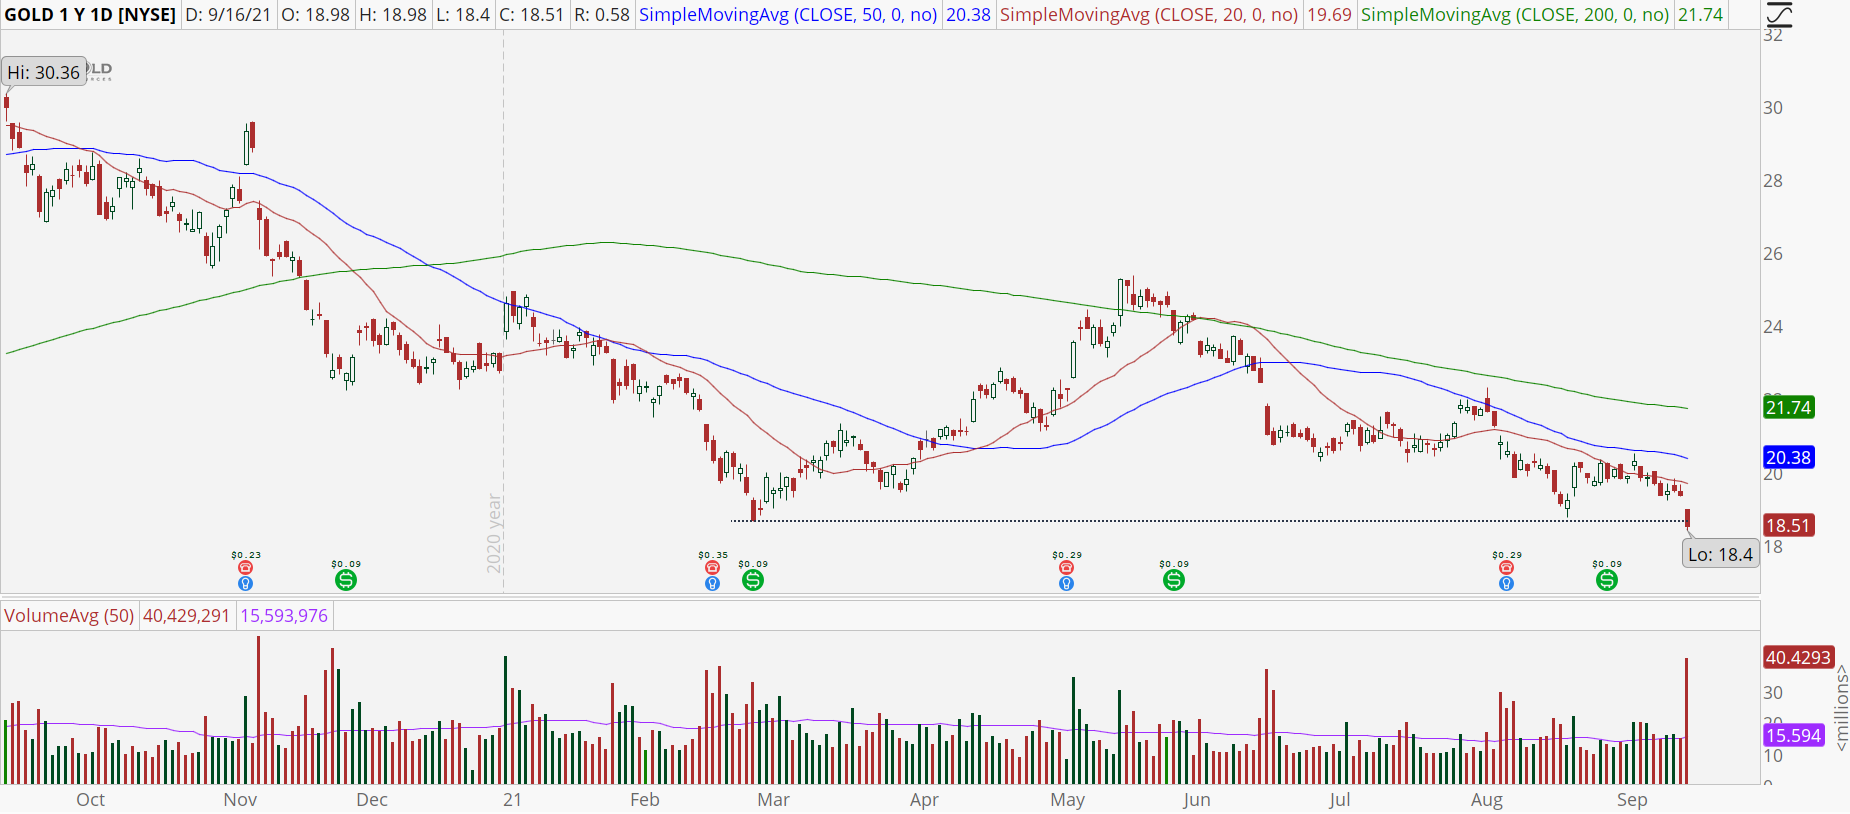 Barrick Gold (GOLD) stock chart with major support test